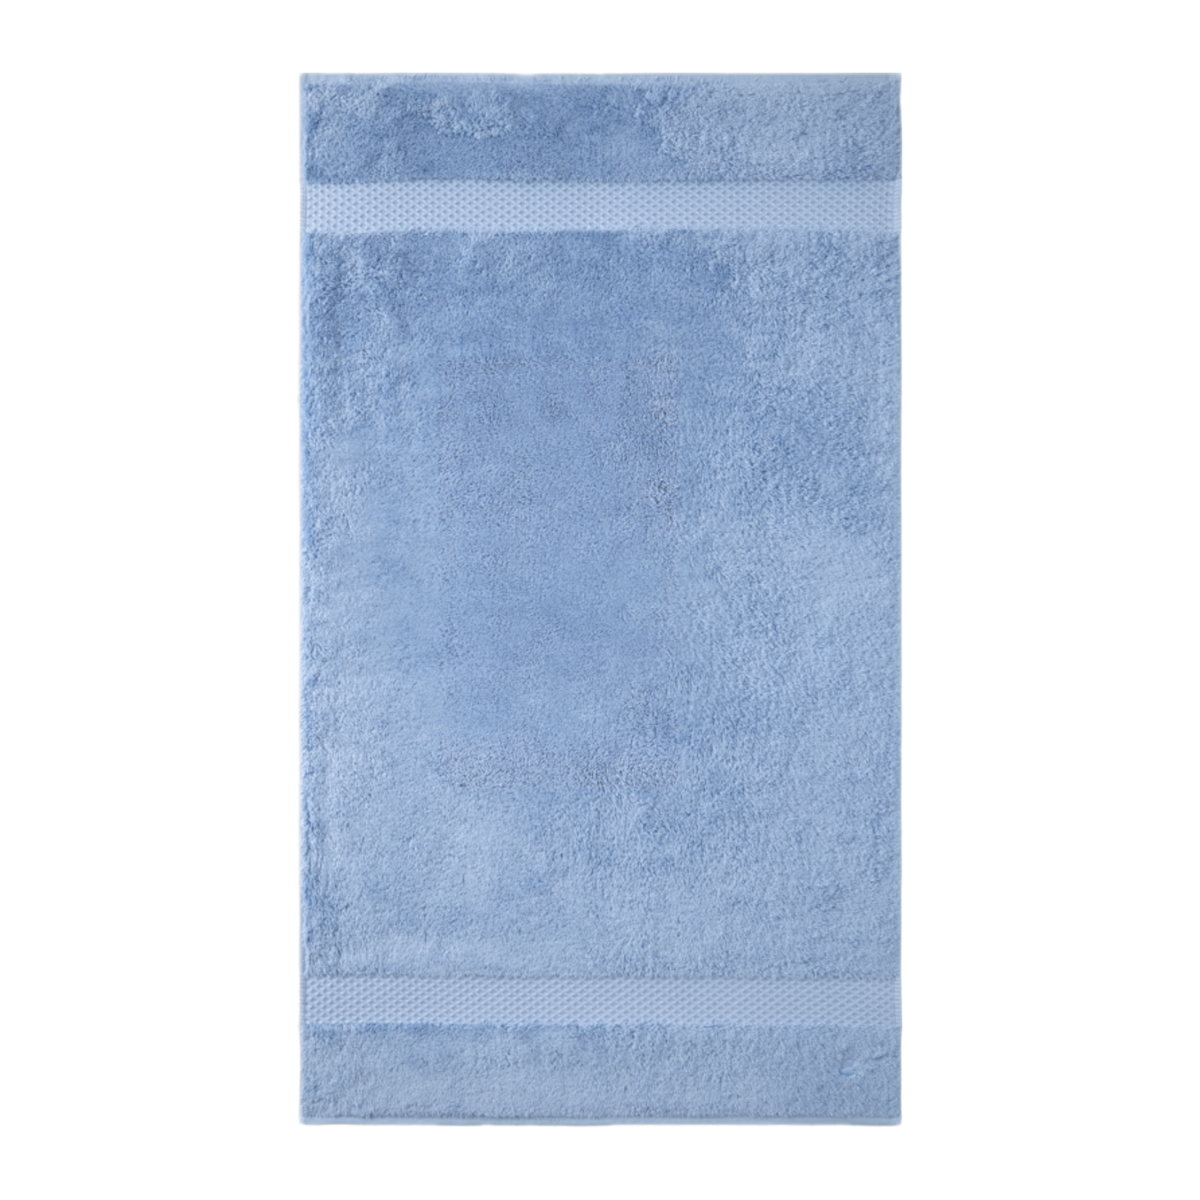 Bath Sheet of Yves Delorme Etoile Bath Towels in Azure Color